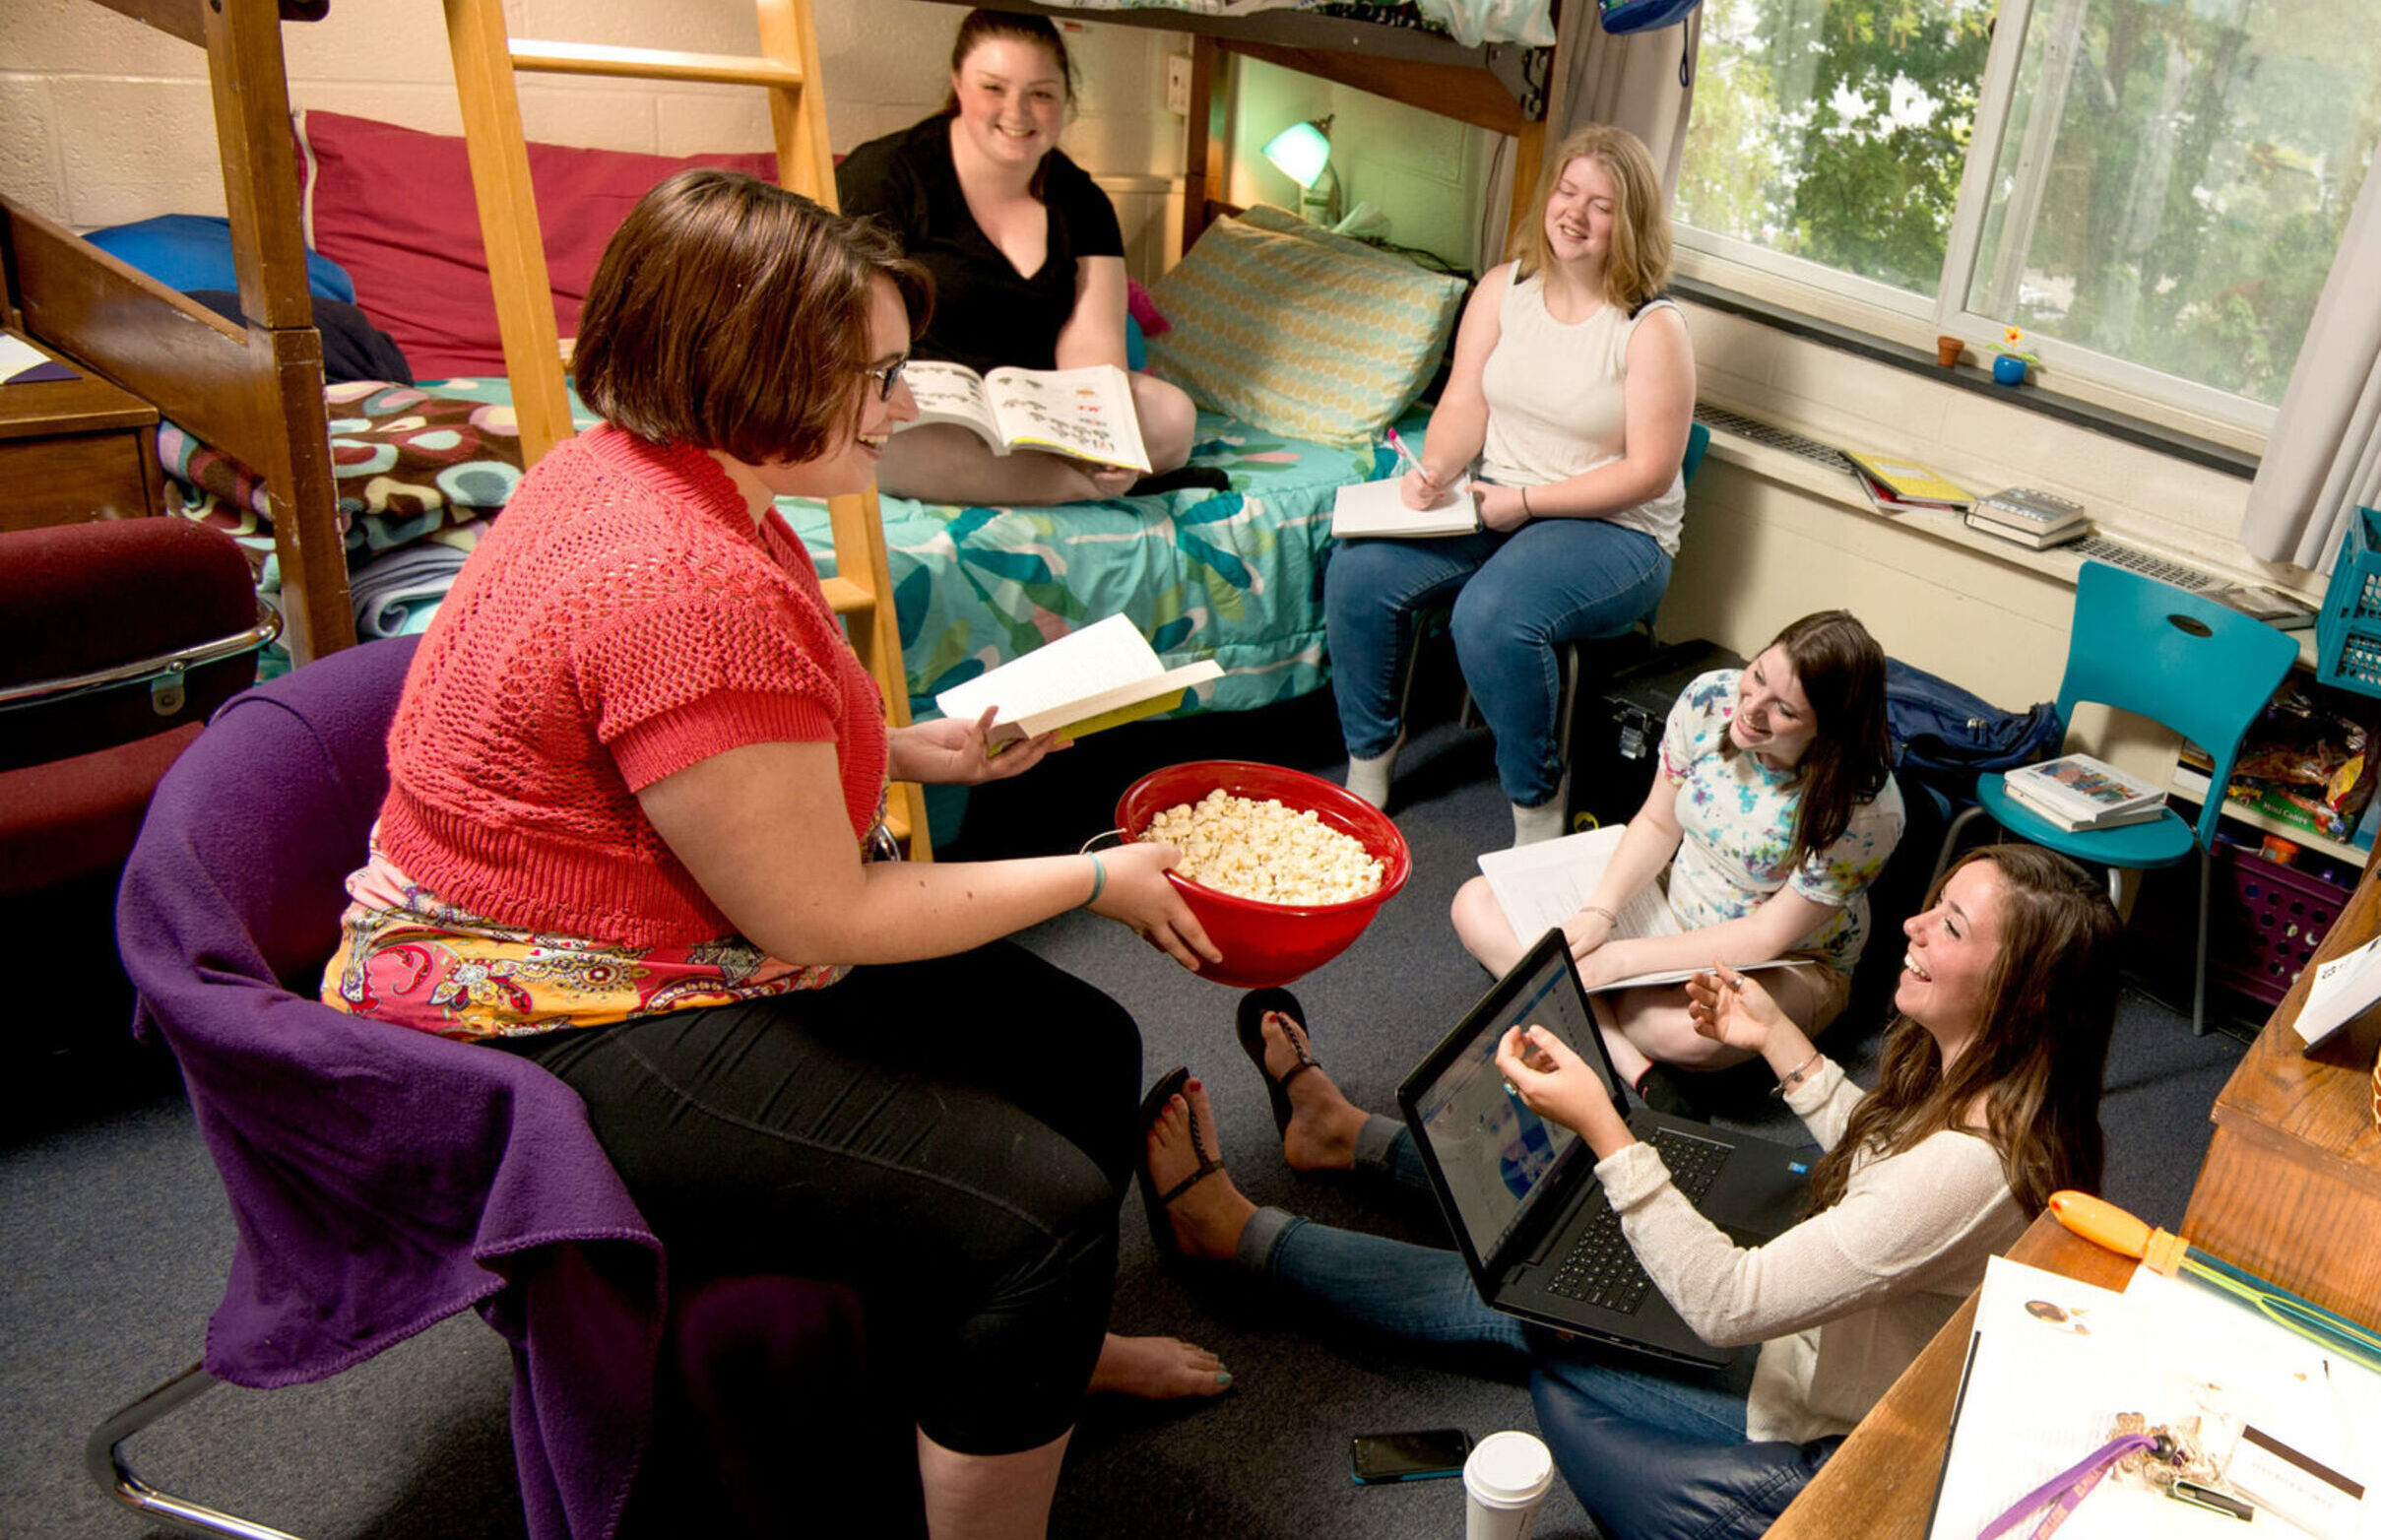 A group of female students hang out and enjoy some popcorn in an Anderson Hall dorm room